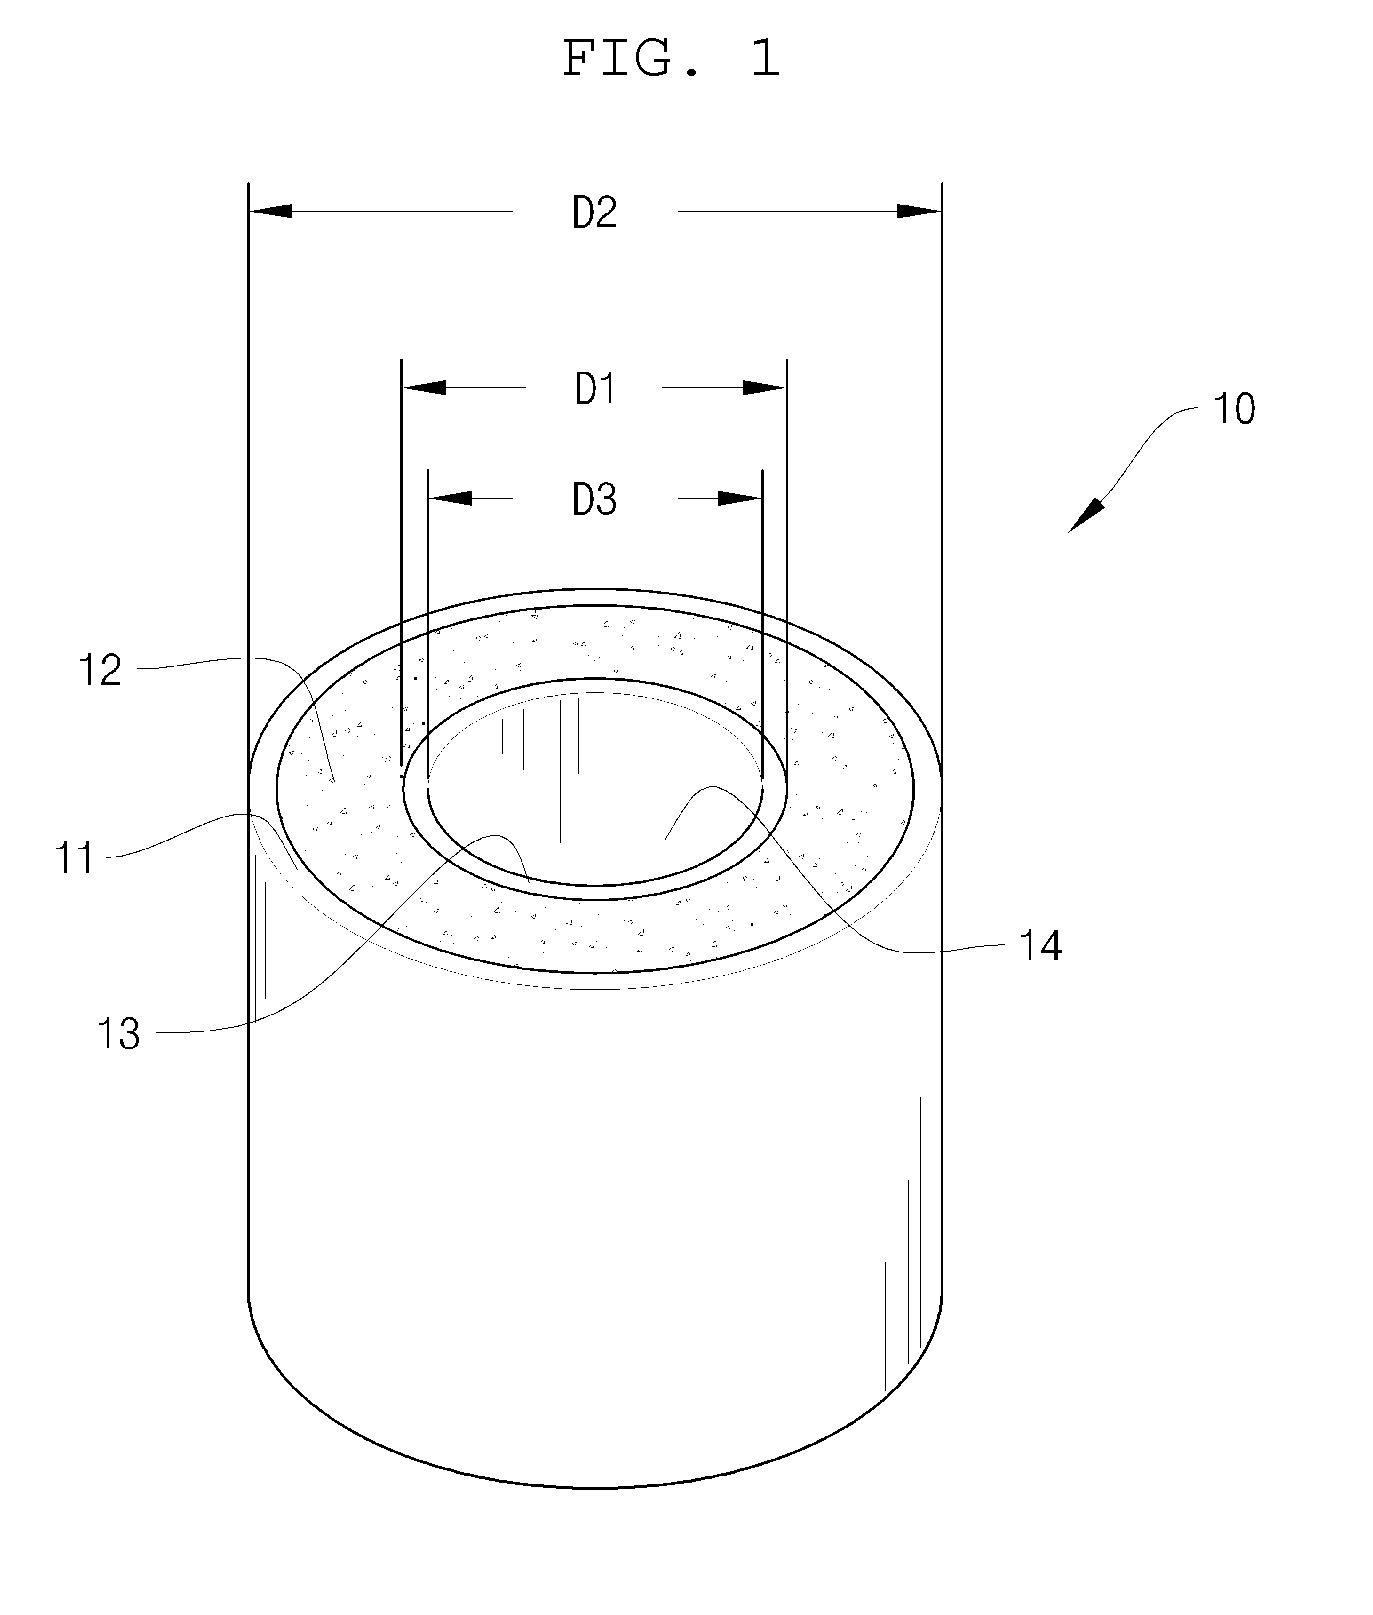 Modular Column System Using Internally Confined Hollow Column Unit and Method of Constructing the Same